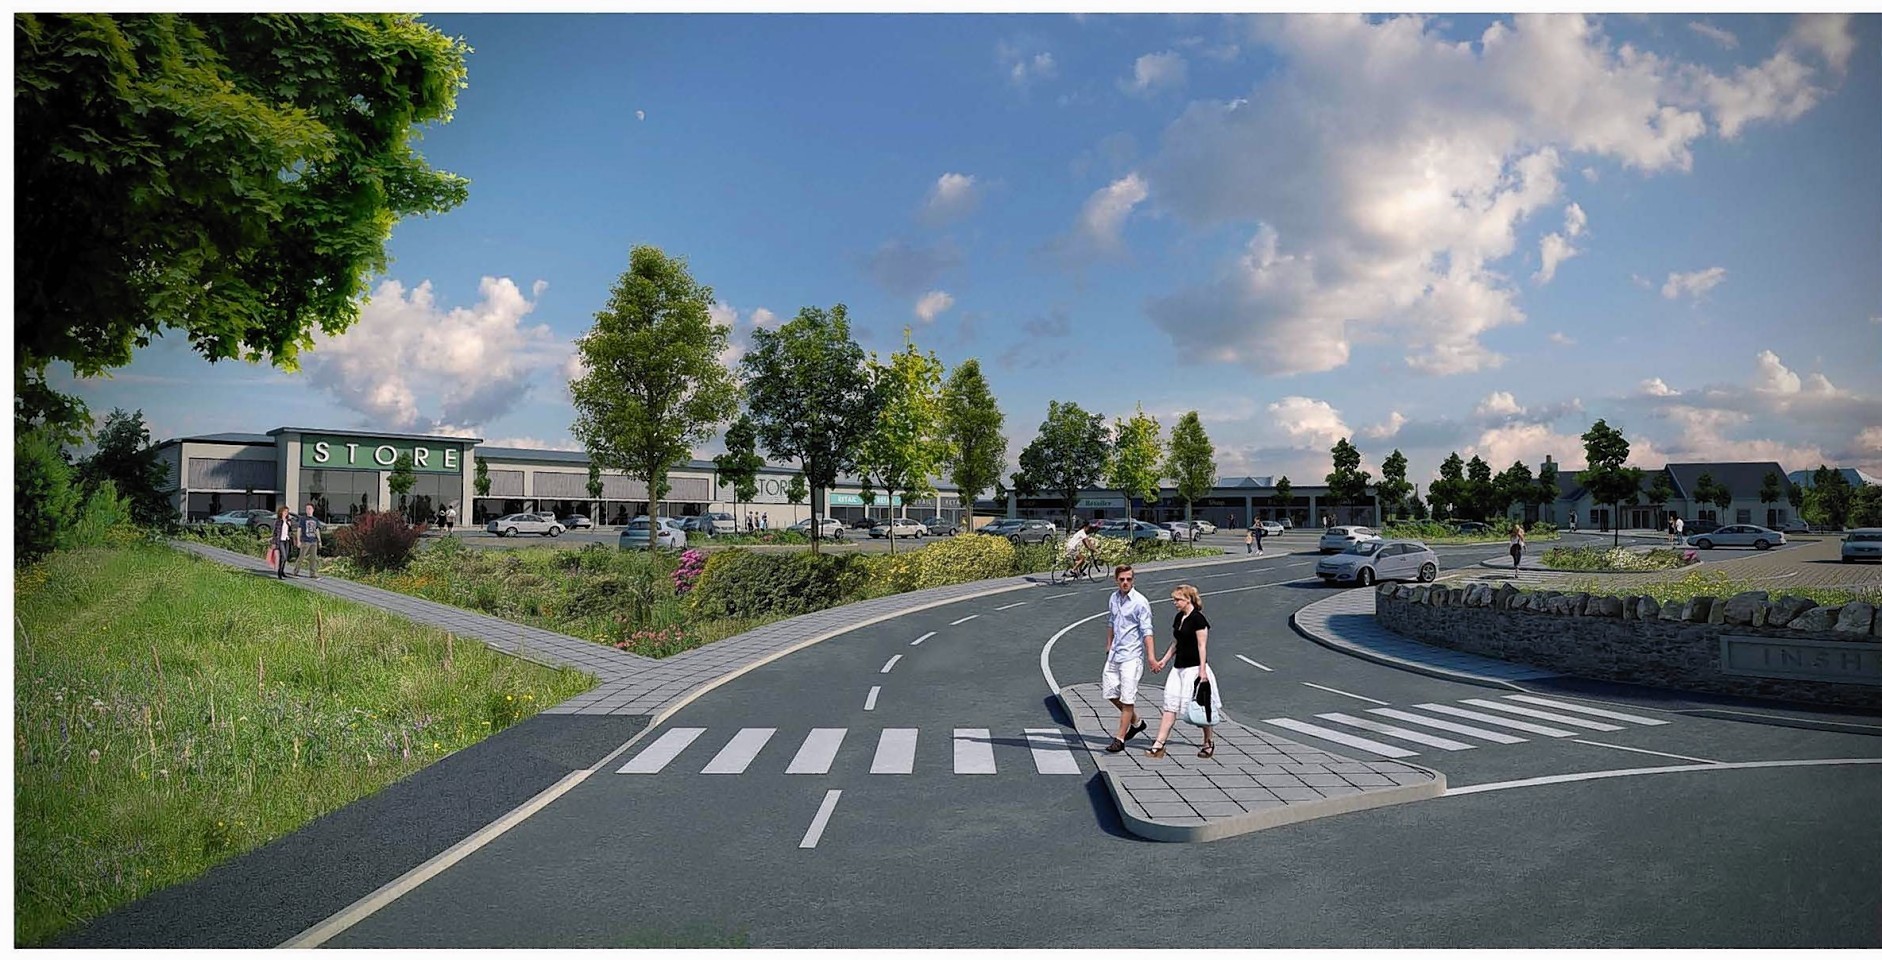 An artists impression of the refused Dell of Inshes retail park